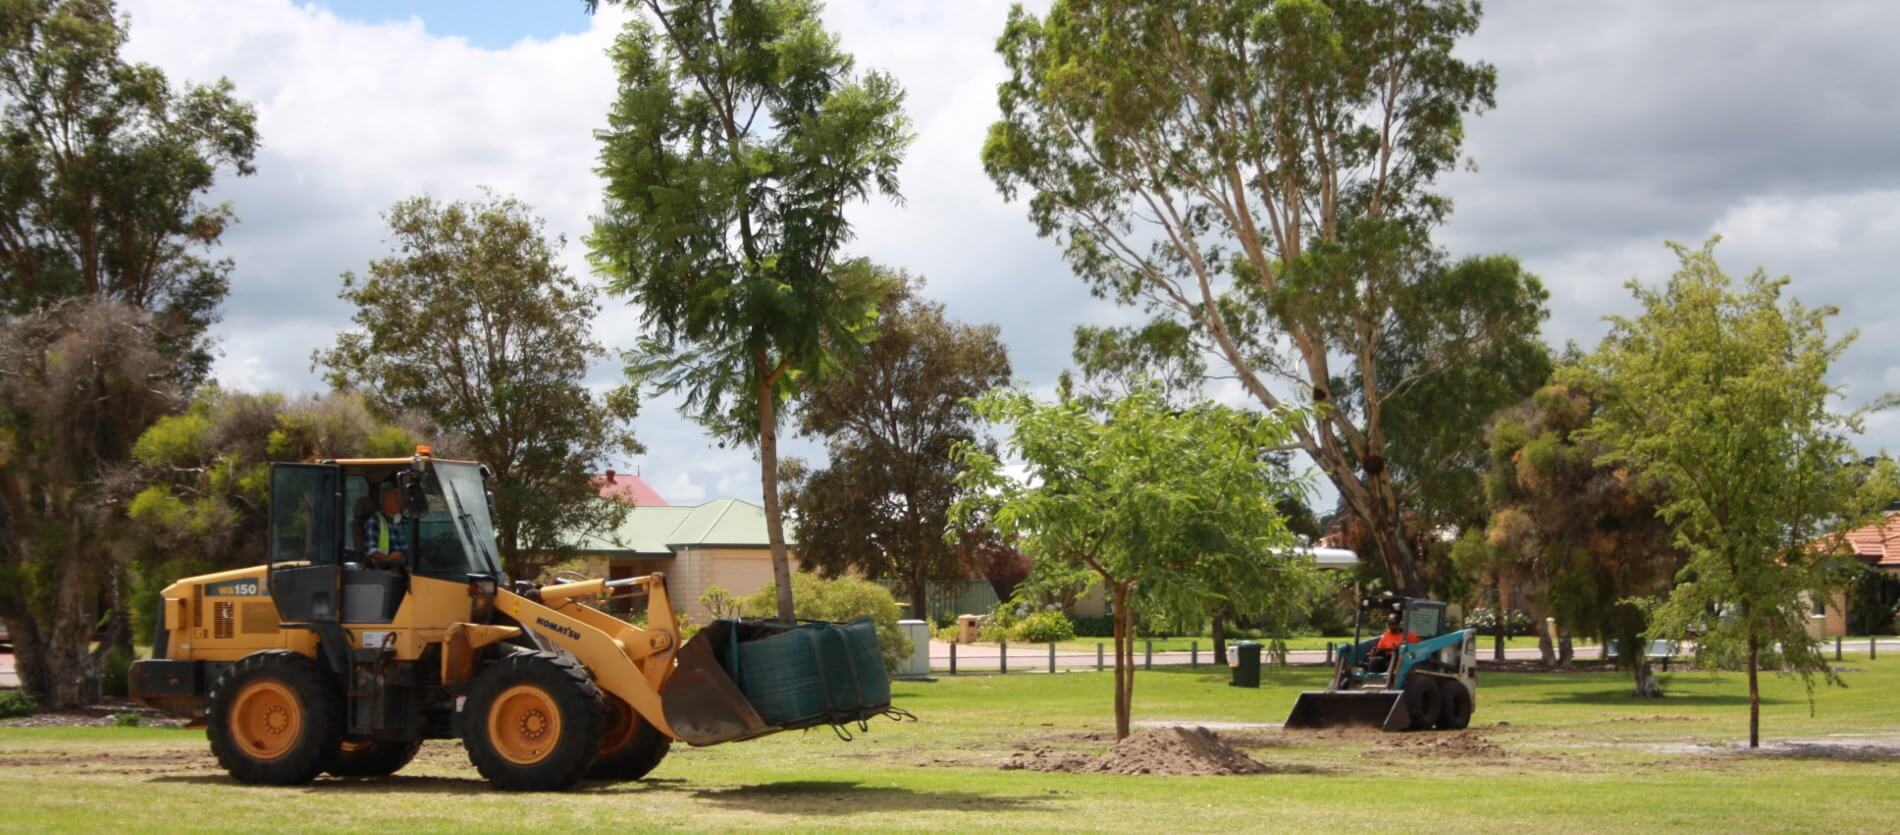 Mature Jacaranda installation at Elmore Way Reserve in High Wycombe in February 2021